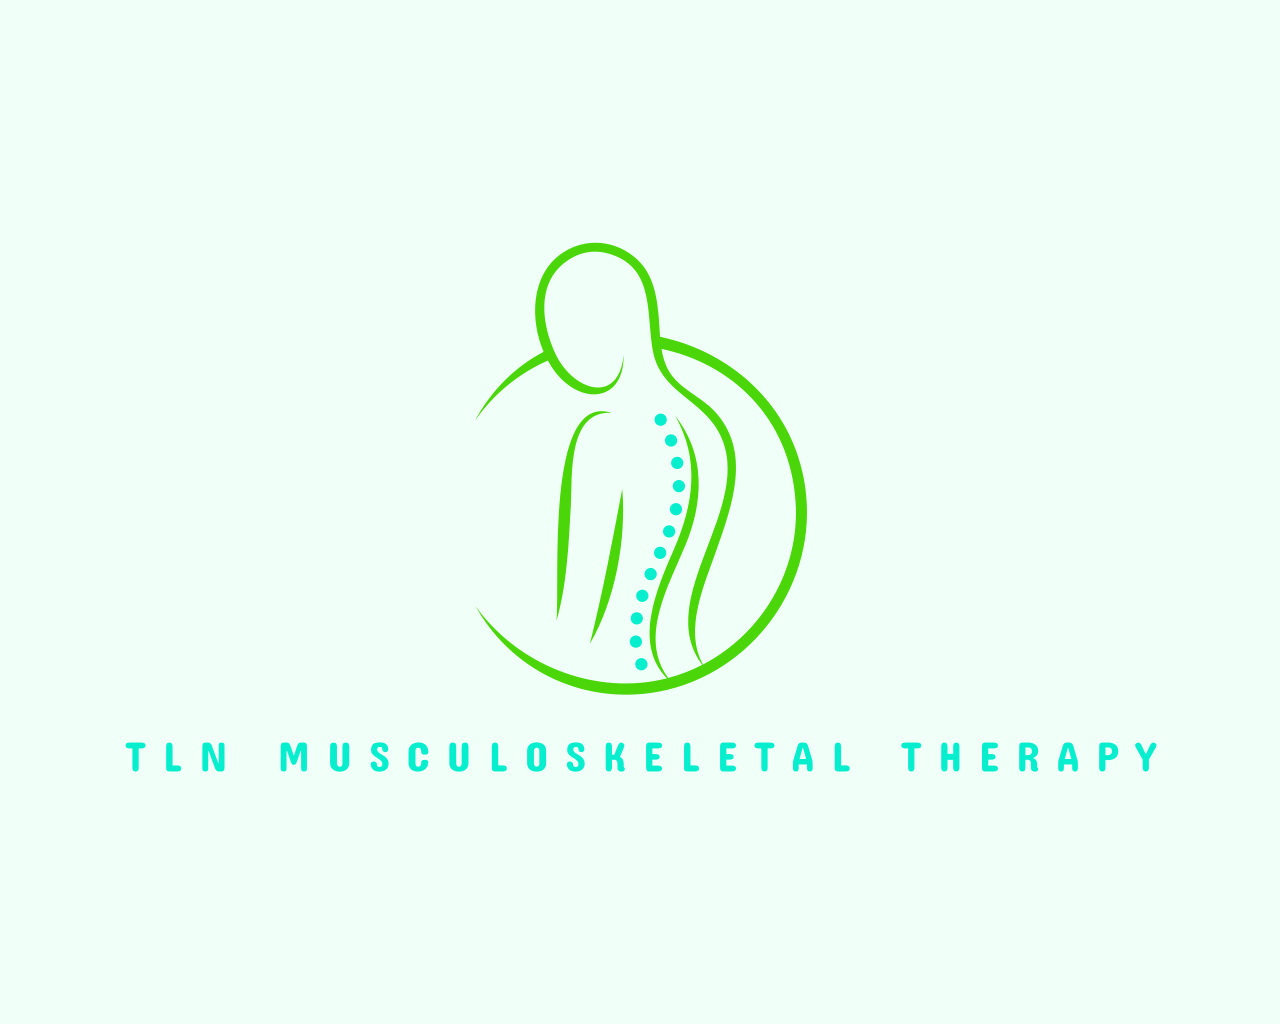 TLN Mobile Musculoskeletal Therapy